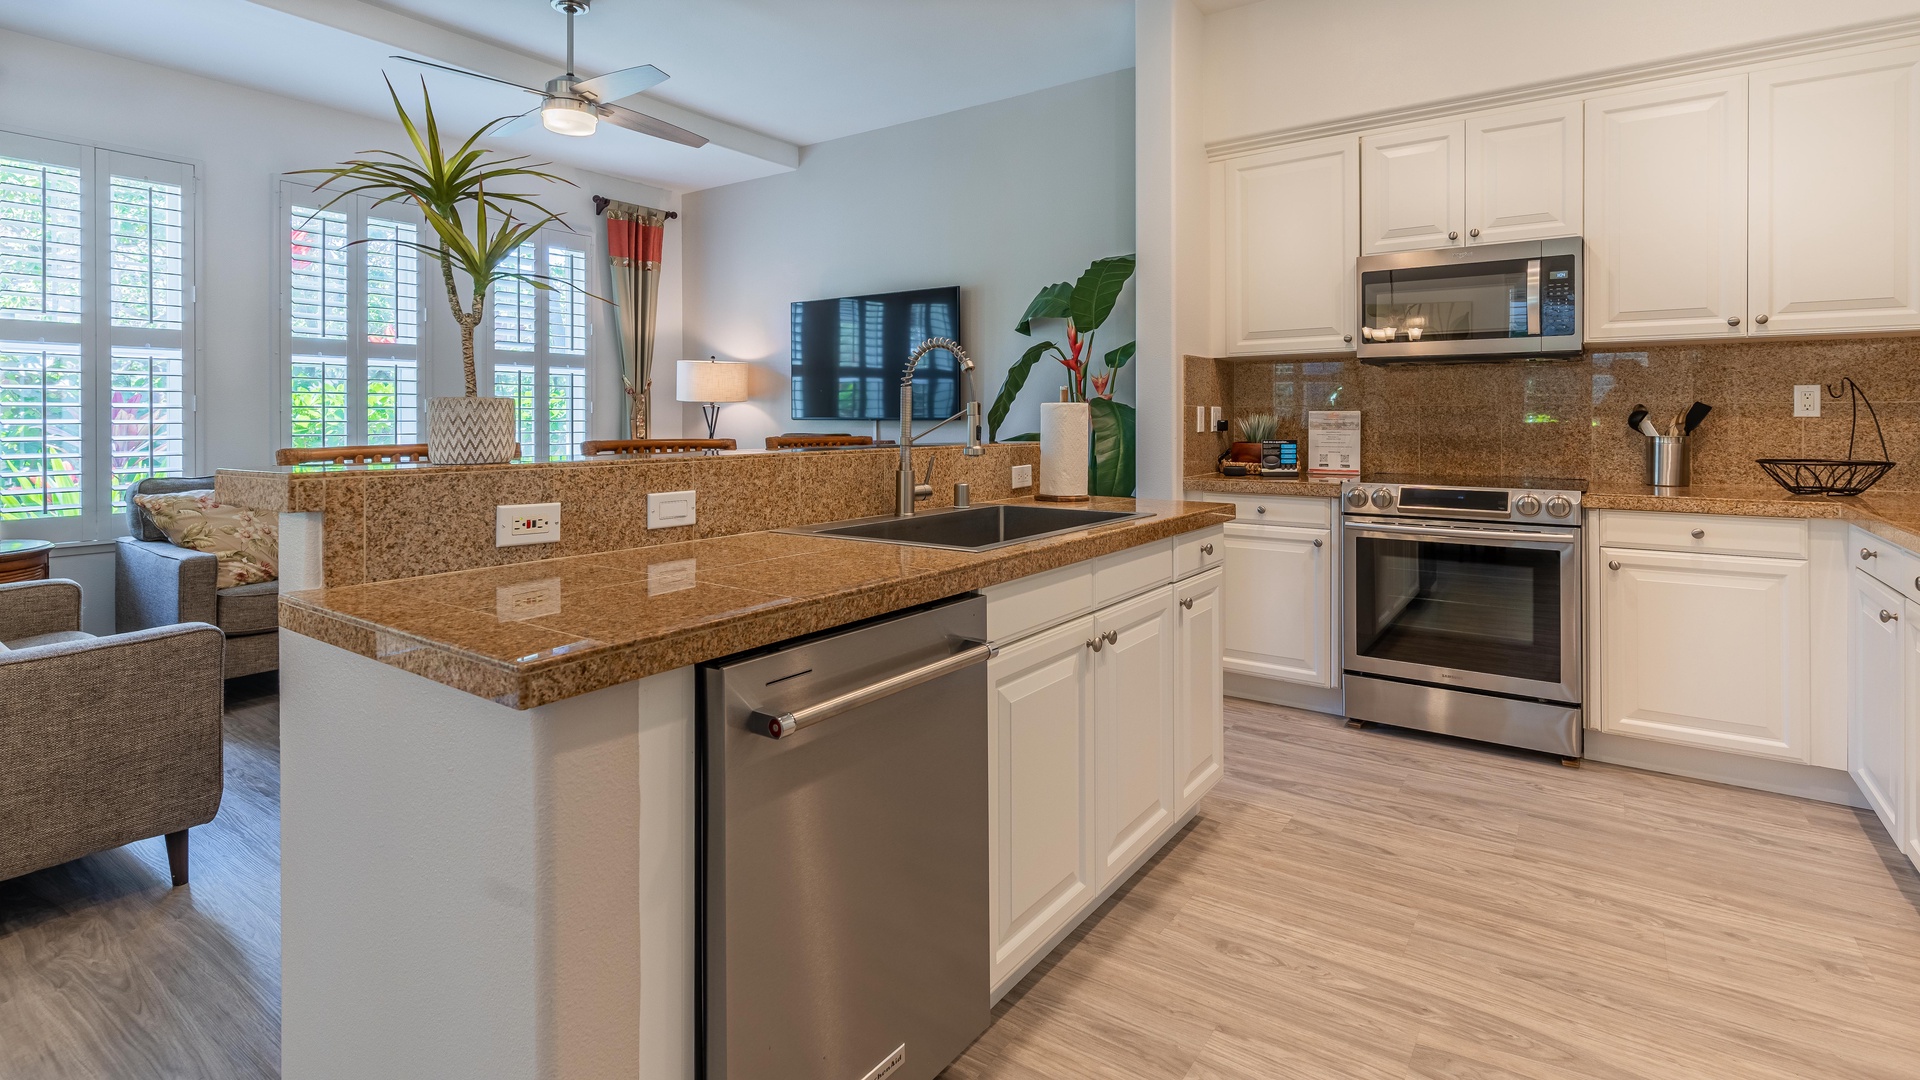 Kapolei Vacation Rentals, Coconut Plantation 1074-1 - The kitchen is the heart of the home with and island for entertaining.